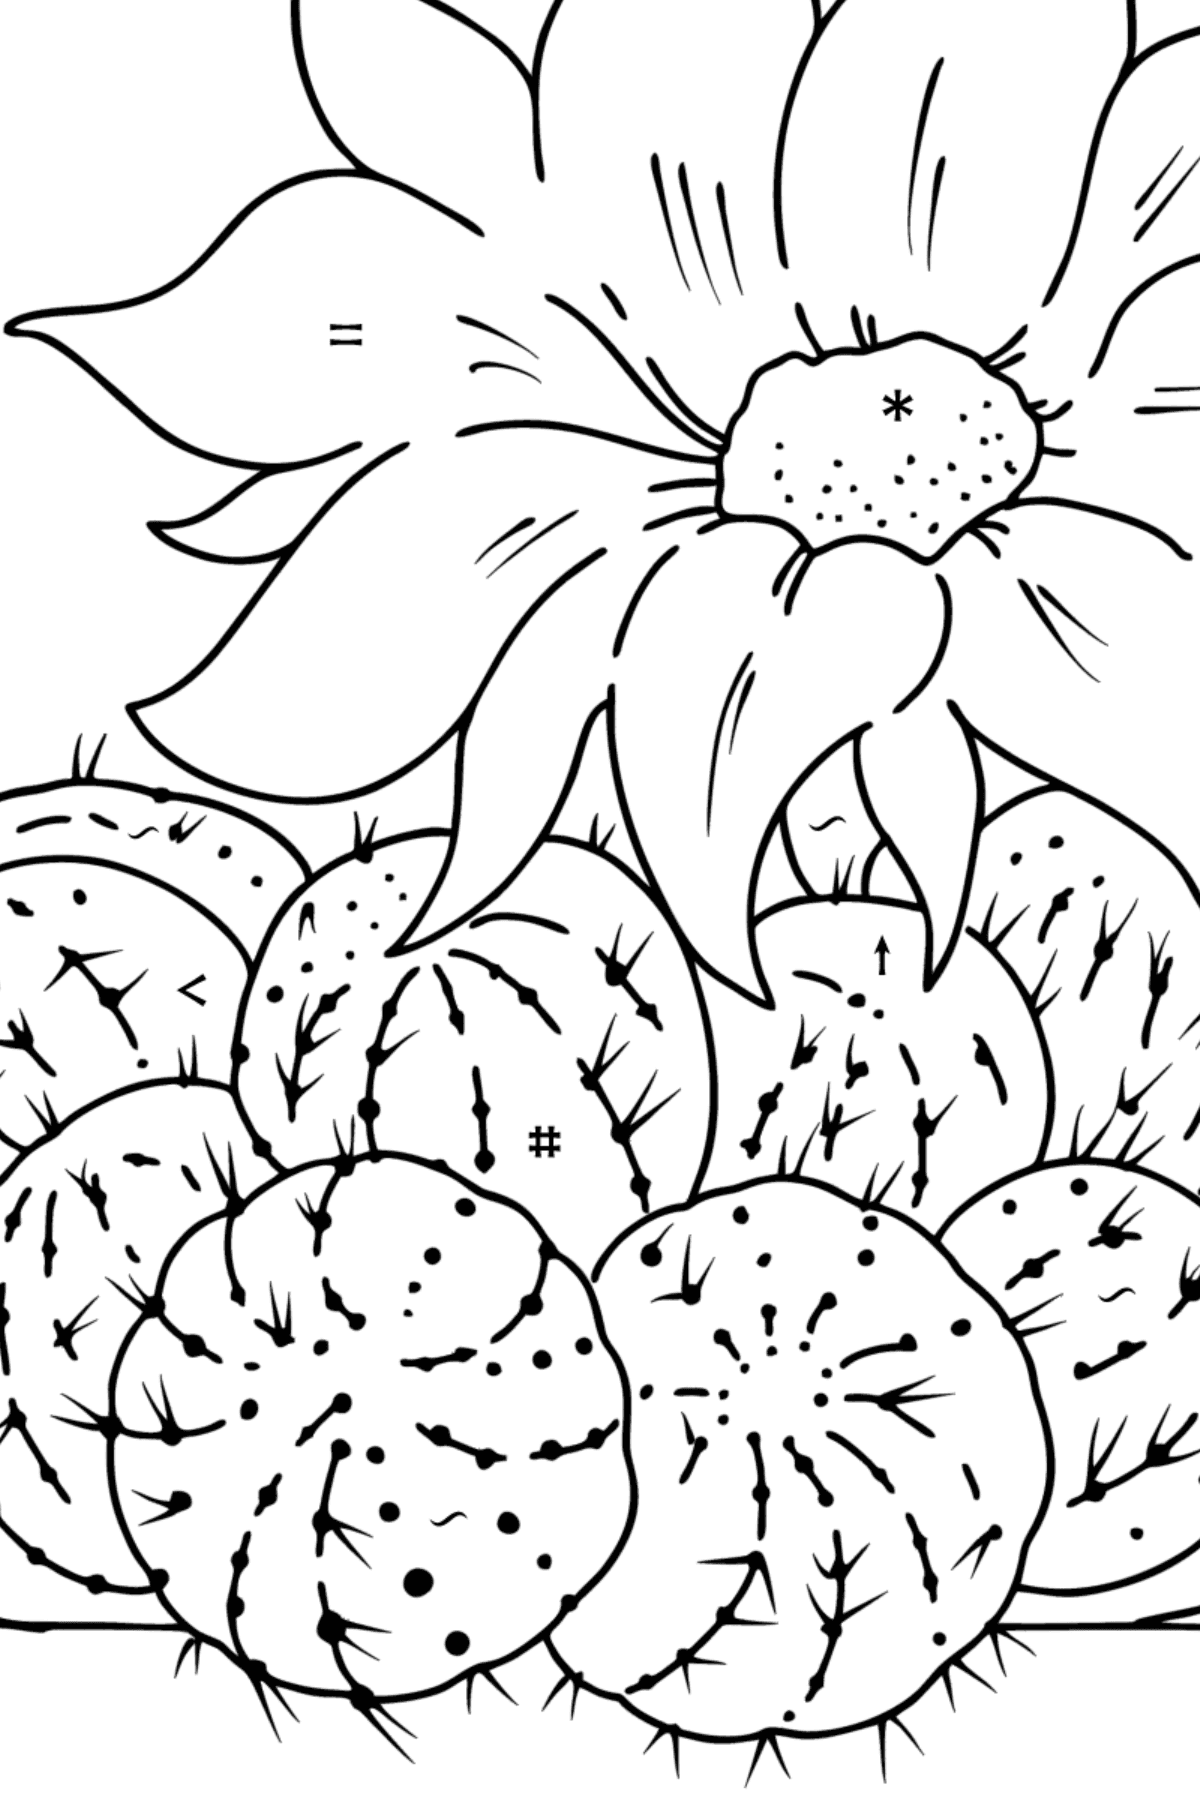 Little Nipple Cactus Coloring page - Coloring by Symbols for Kids